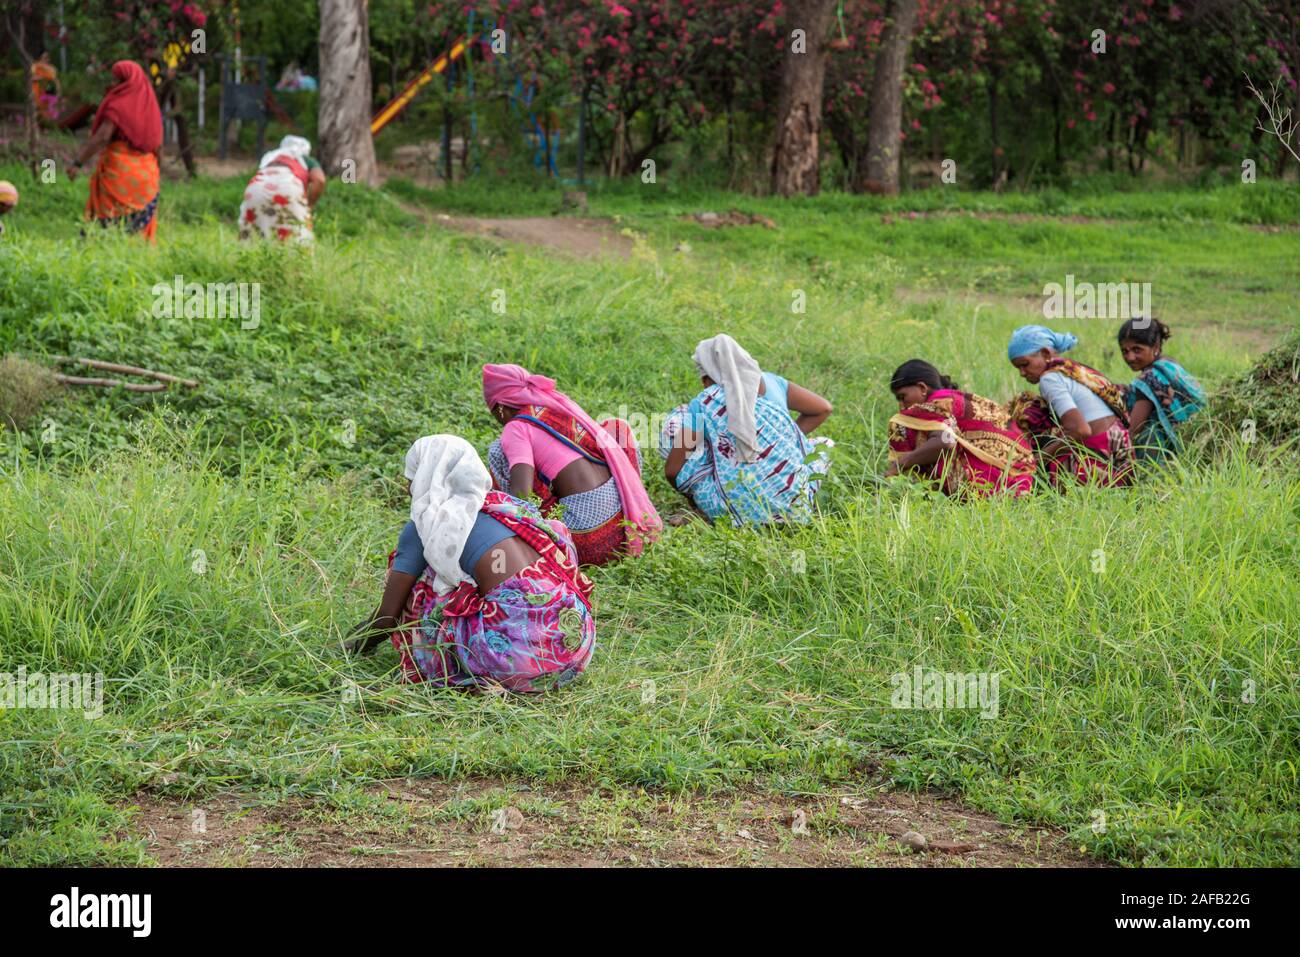 AMRAVATI, MAHARASHTRA, INDIA, JULY - 5, 2017: Unidentified woman worker working in the field, Gardening scene at park, woman worker cutting unwanted g Stock Photo